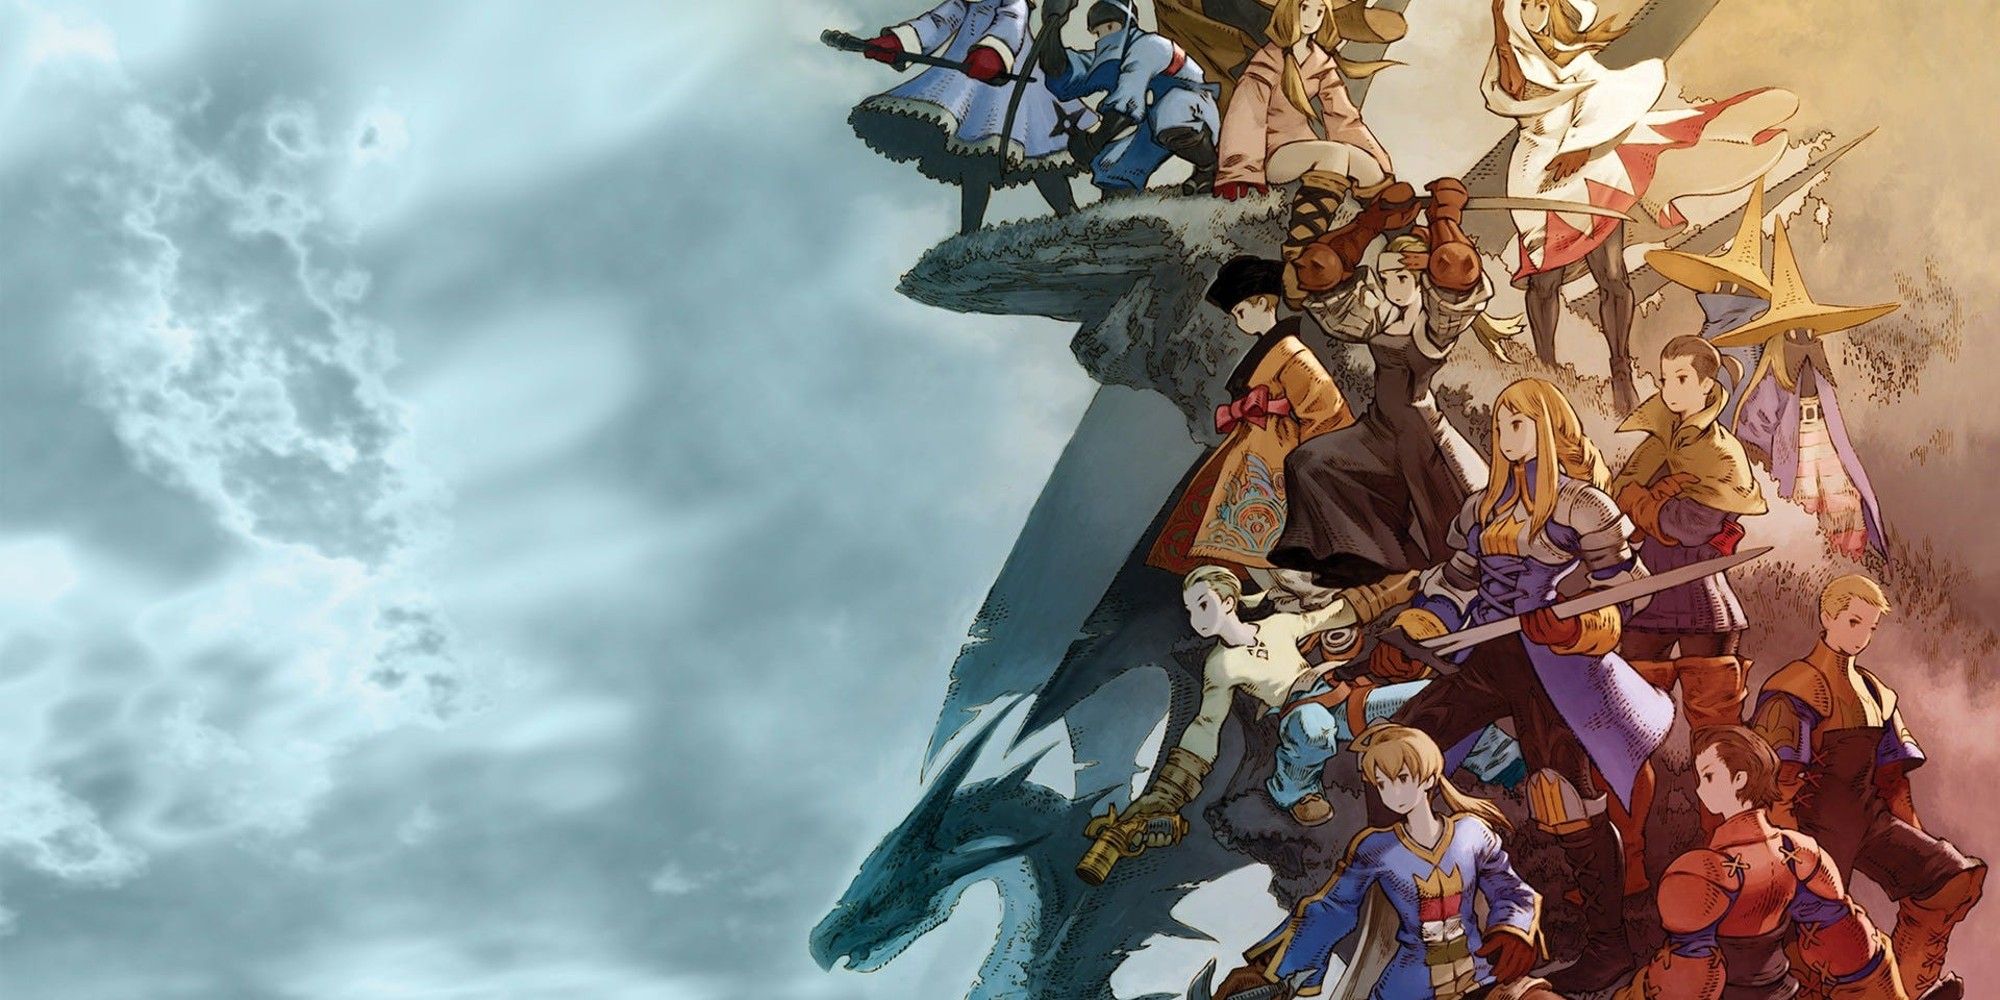 The main characters of Final Fantasy Tactics gathered against a cloudy sky.